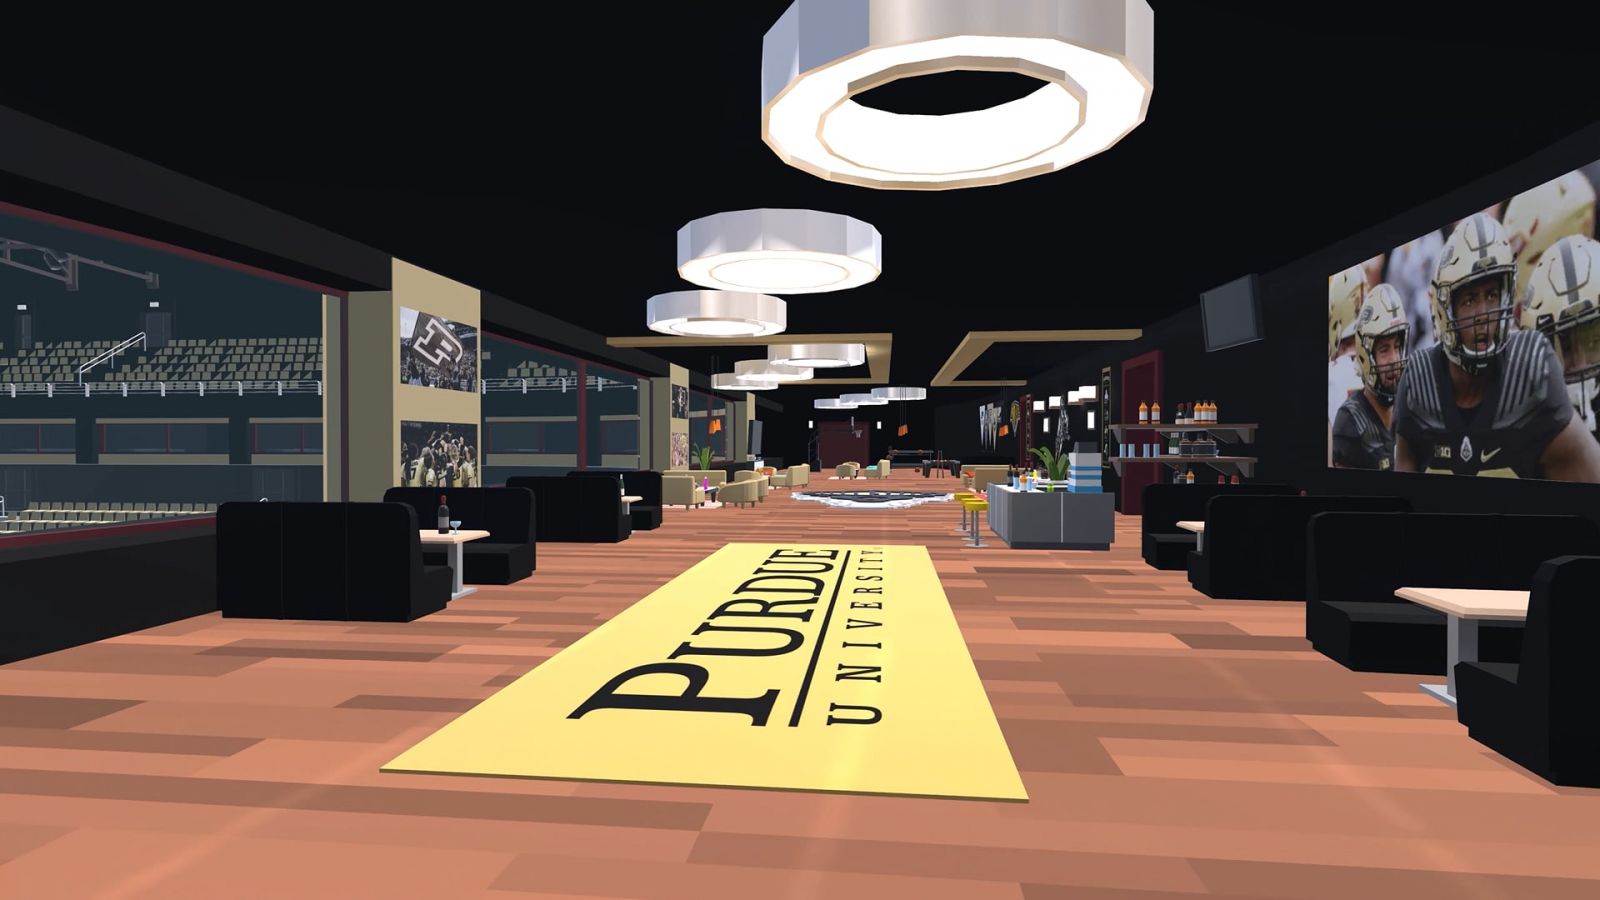 A fully-interactive replica of the private luxury suites, outfitted with activities designed and customized by Design Futures students and with a view of the virtual playing field at Ross-Ade Stadium. (Courtesy of Iconic Engine)